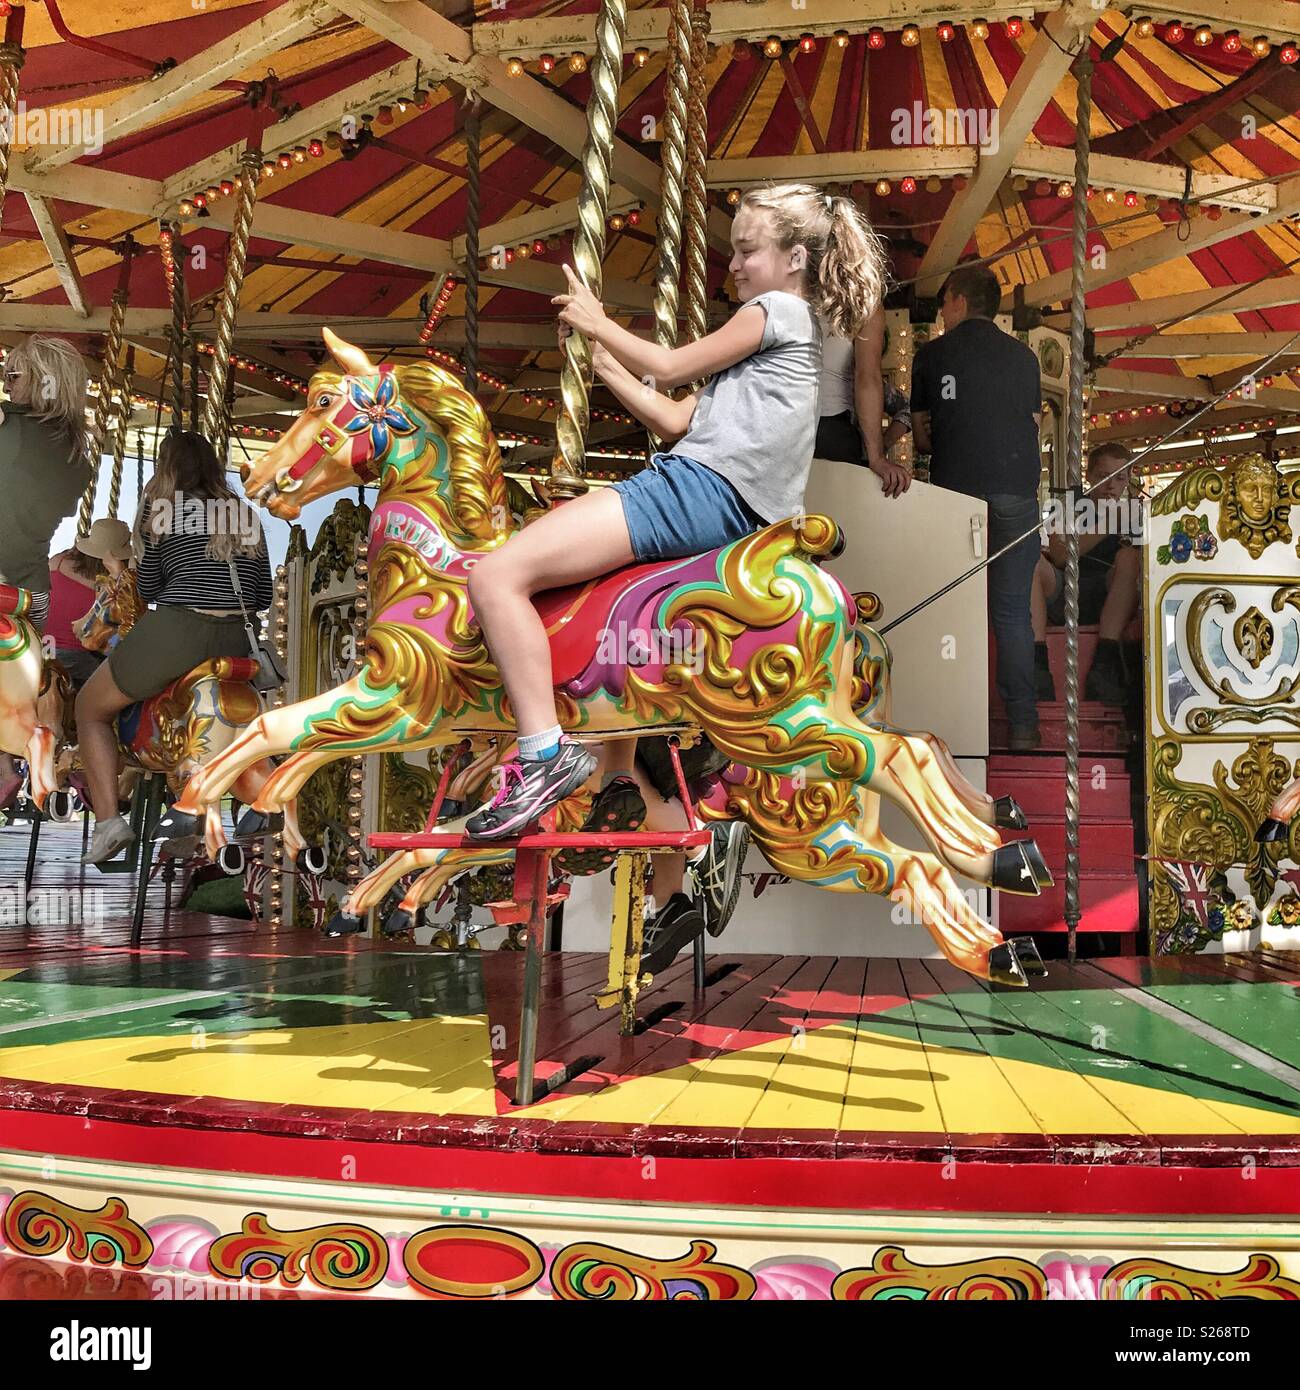 Fairground rides, young girl on merry-go-round at Sherborne Castle Country Fair, Sherborne, Dorset, England Stock Photo